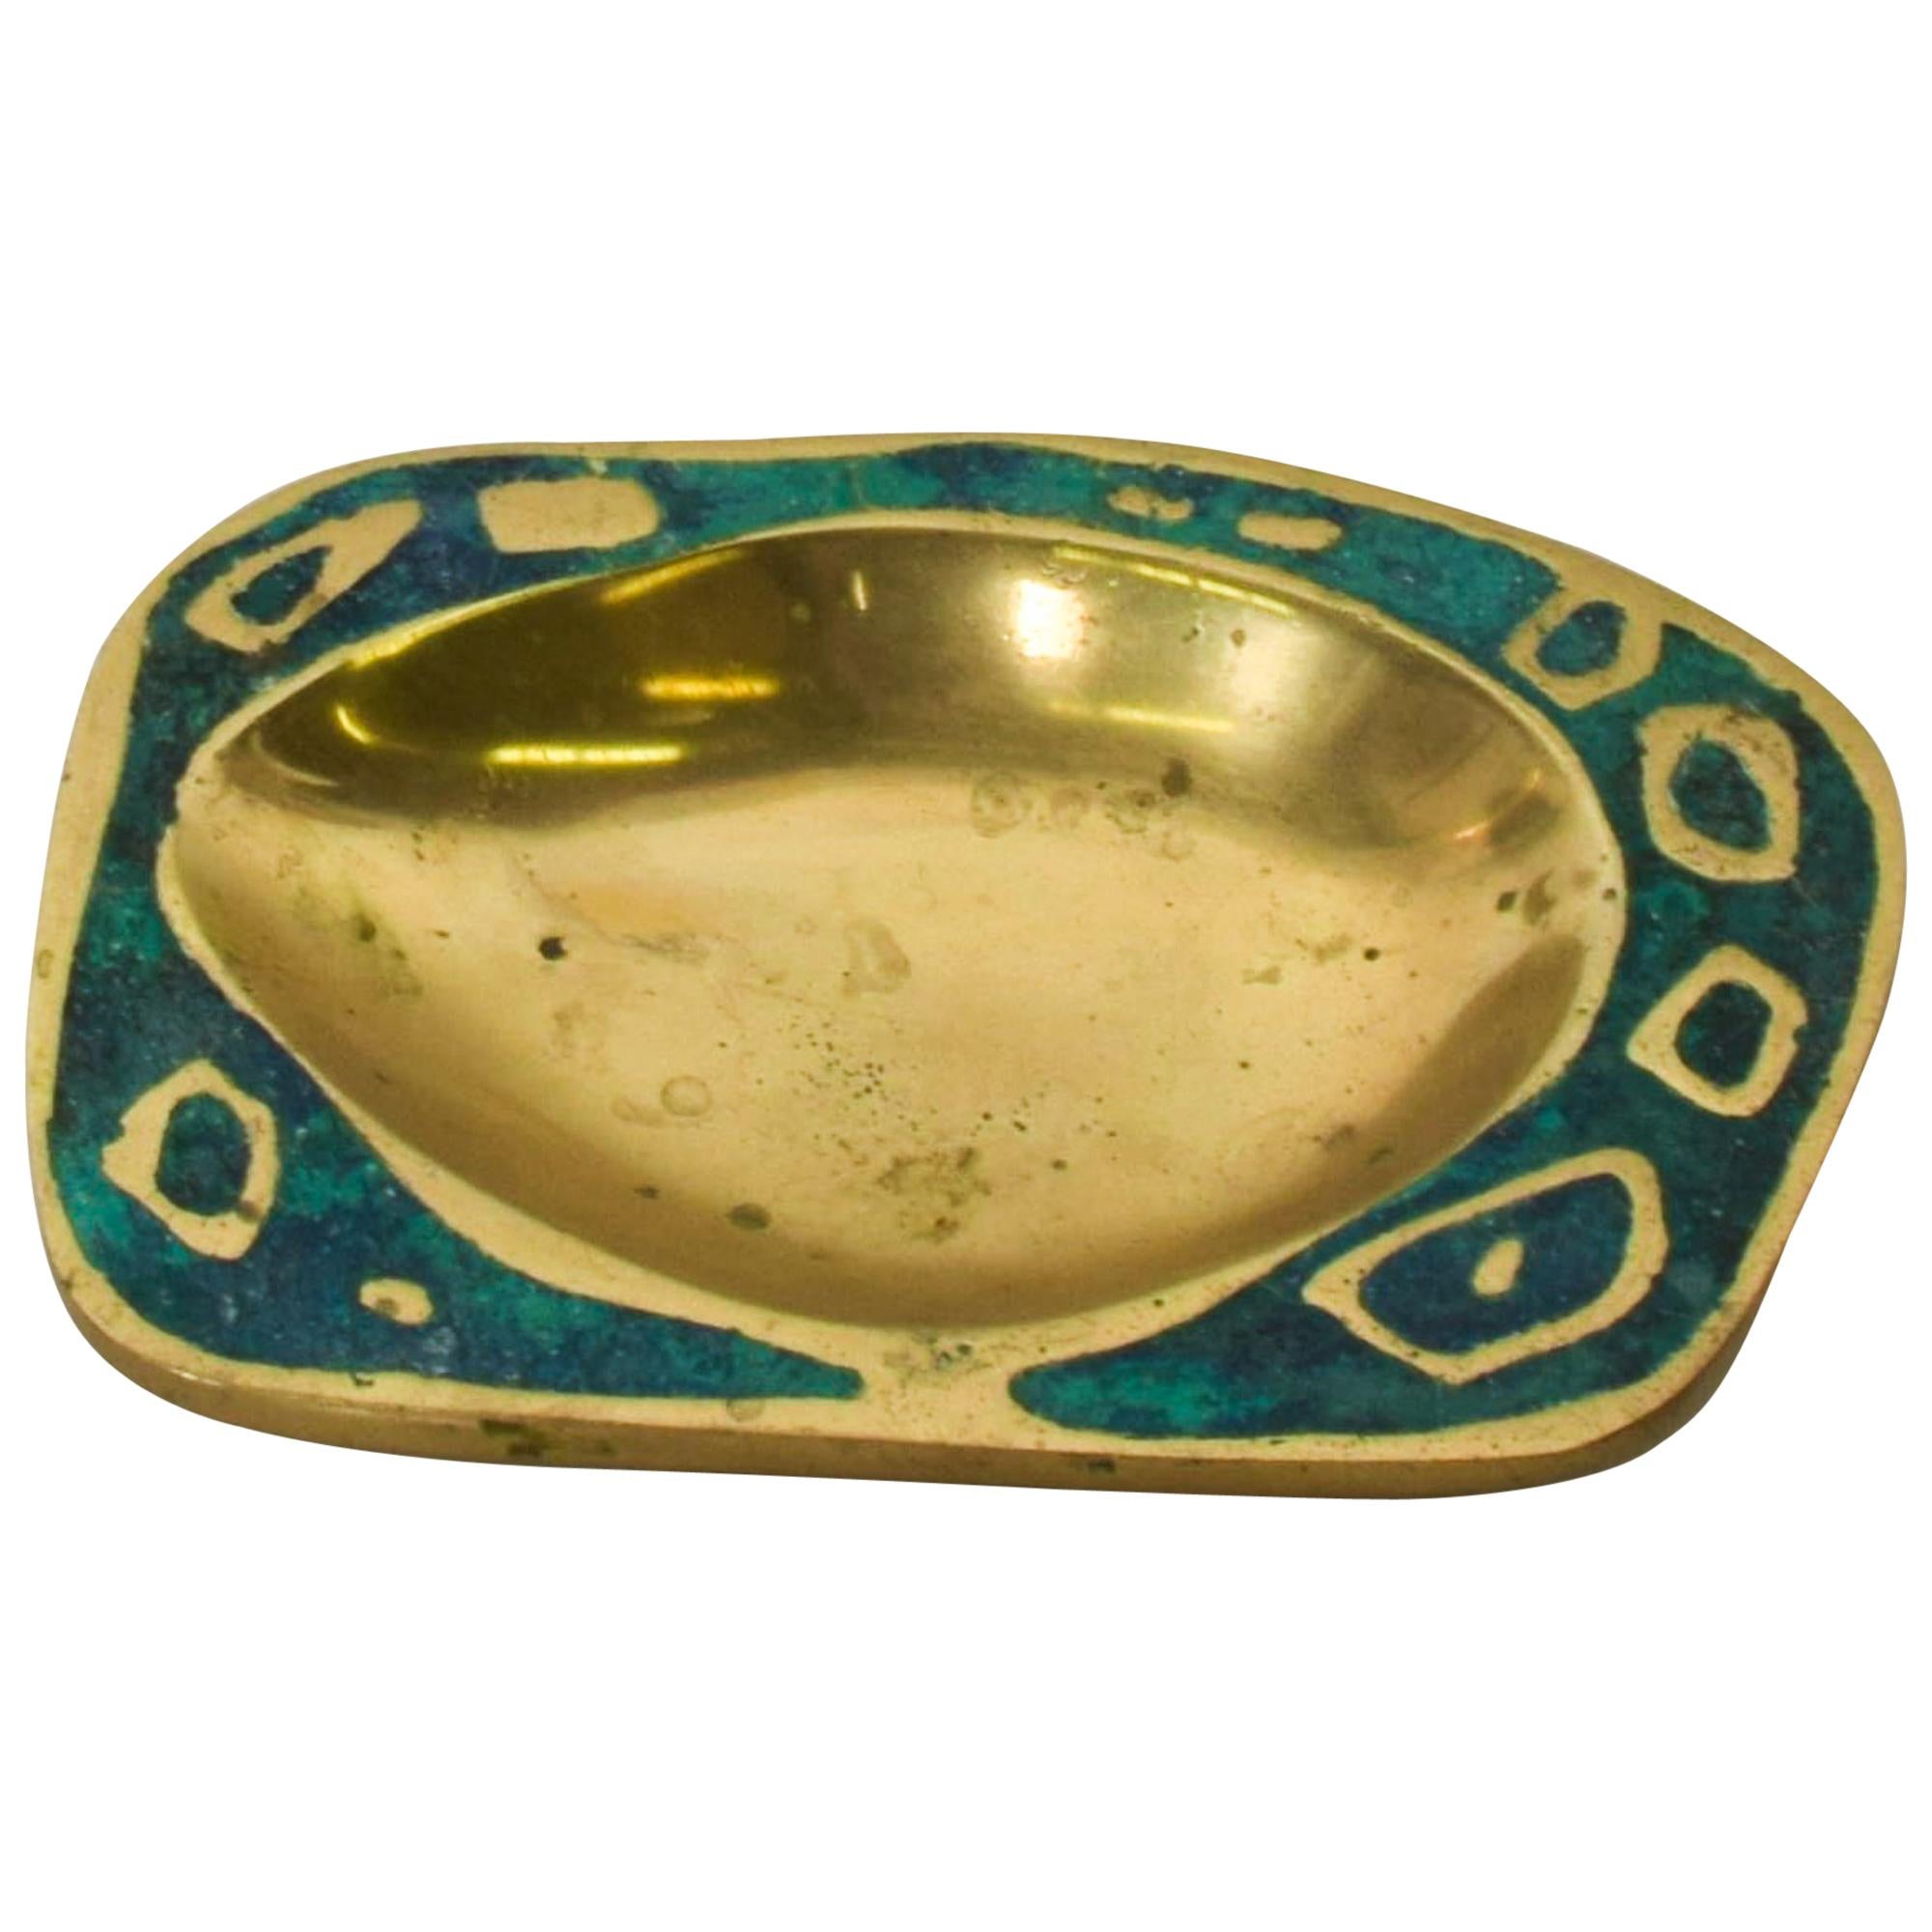 1958 Pepe Mendoza Spectacular Turquoise and Brass Gold Dish Midcentury Modernism